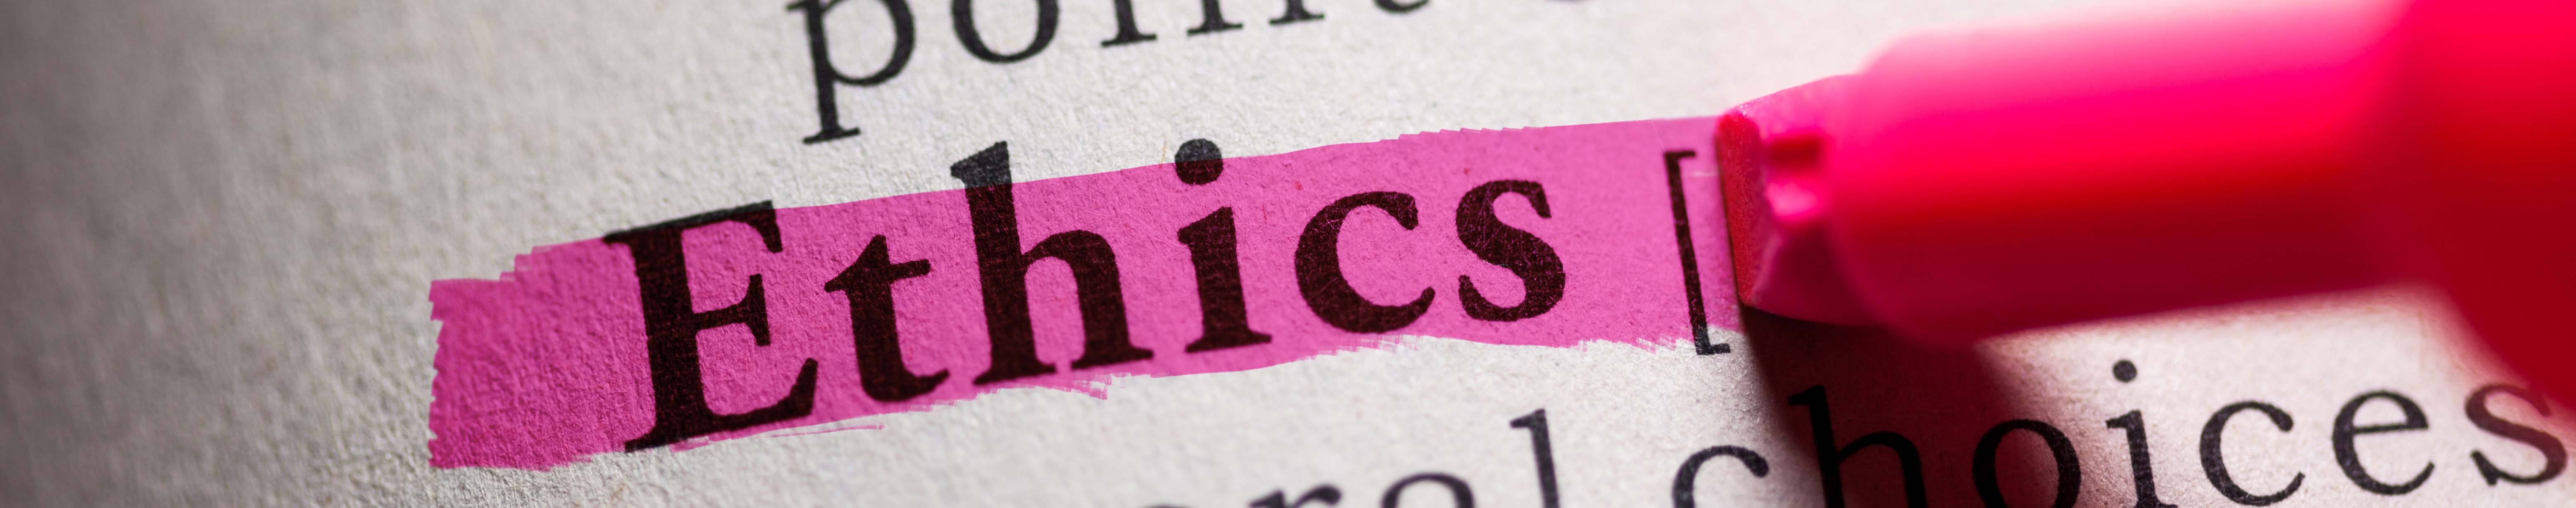 The word Ethics